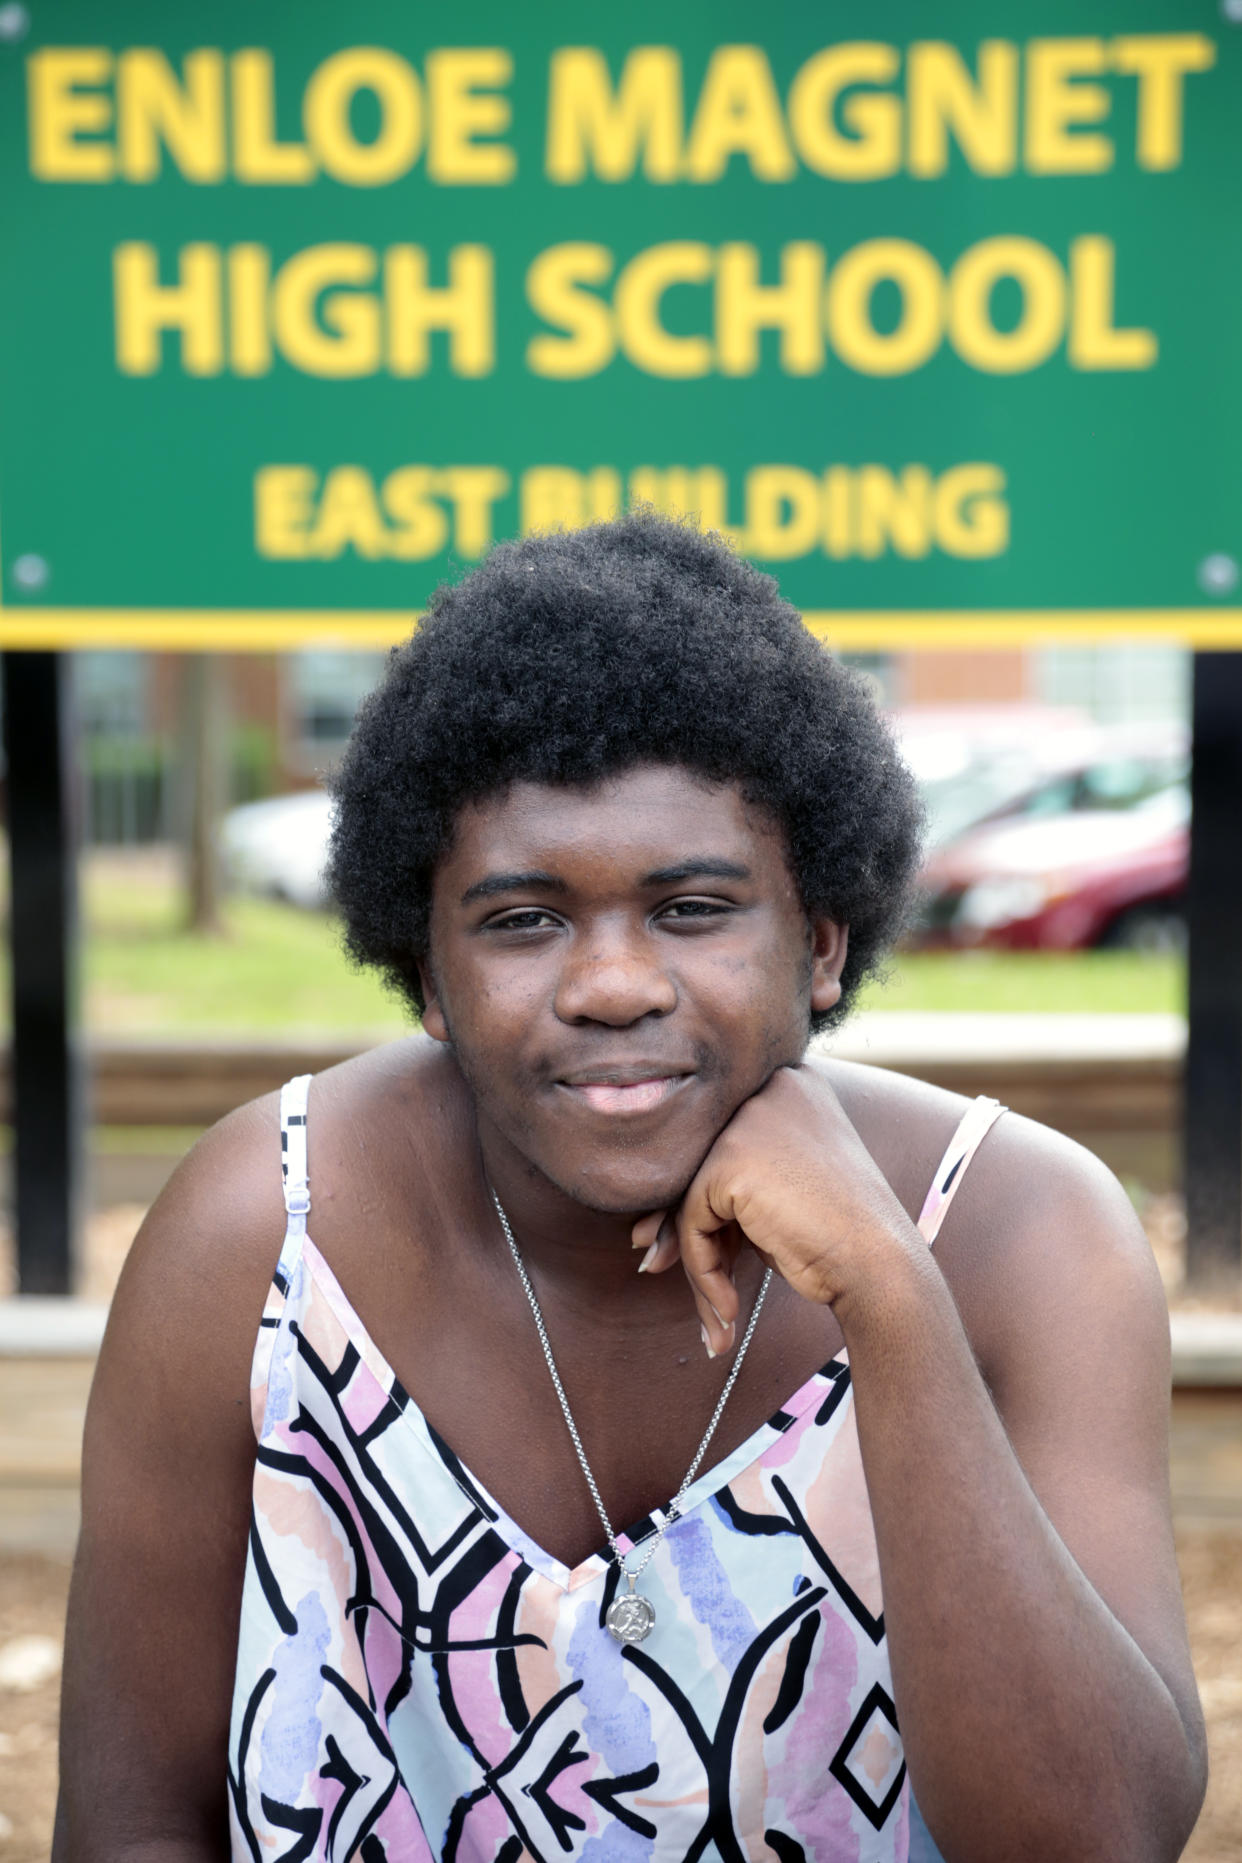 Graduating senior from Enloe High School Malika Mobley has concerns about proposed increases in police presence in schools following the recent Texas school shooting, Thursday, June 3, 2022, in Raleigh, N.C. To reassure students and educators following the mass shooting at a Texas elementary school, districts around the country pledged to boost security measures and increased the presence of law enforcement on campus. (AP Photo/Chris Seward)